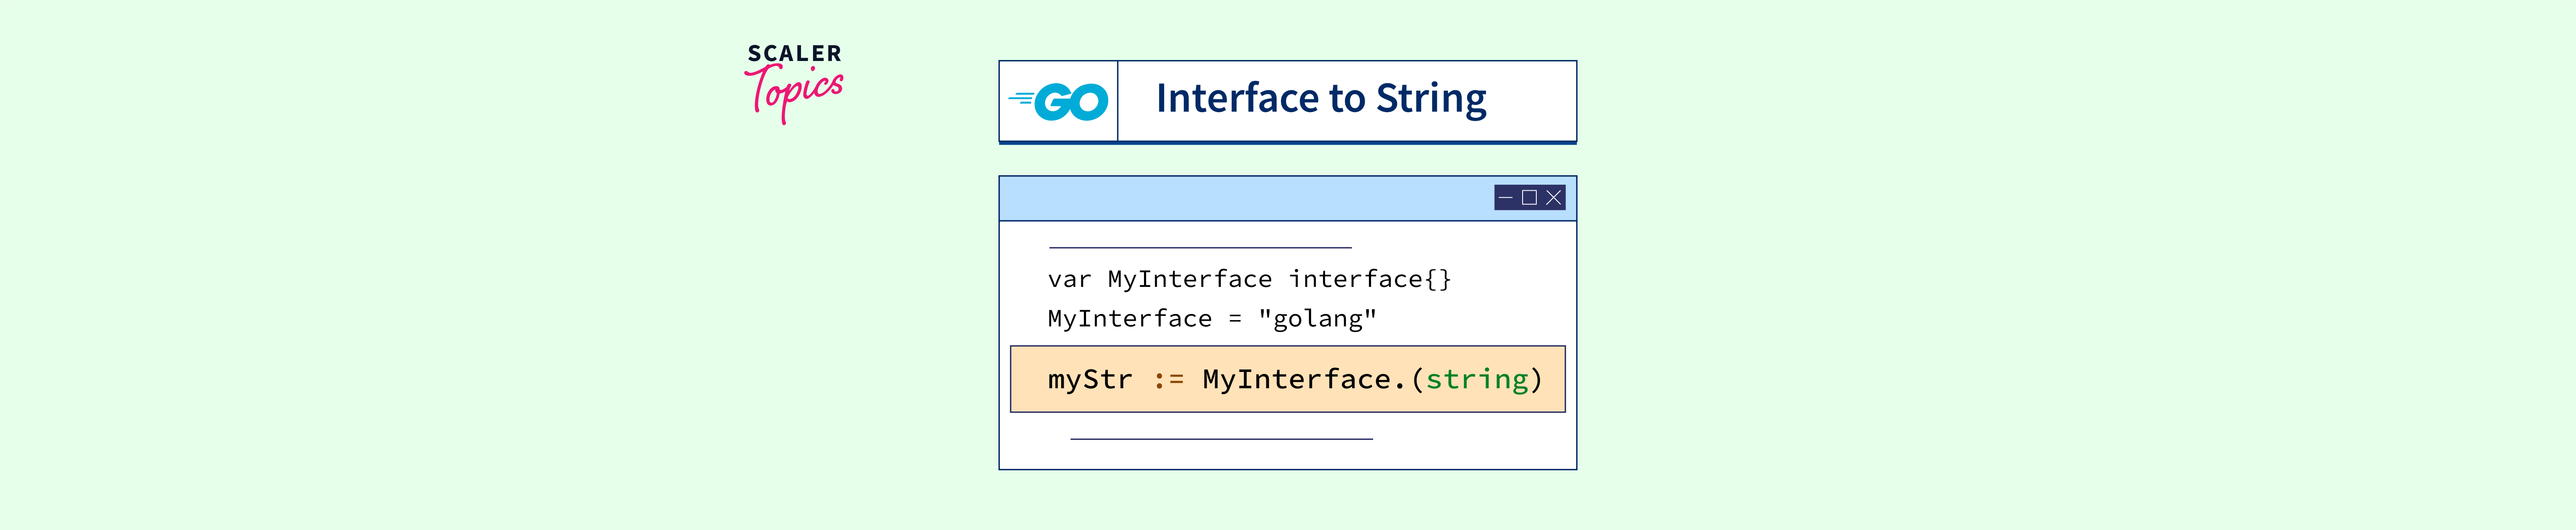 Interface To String Golangw.webp